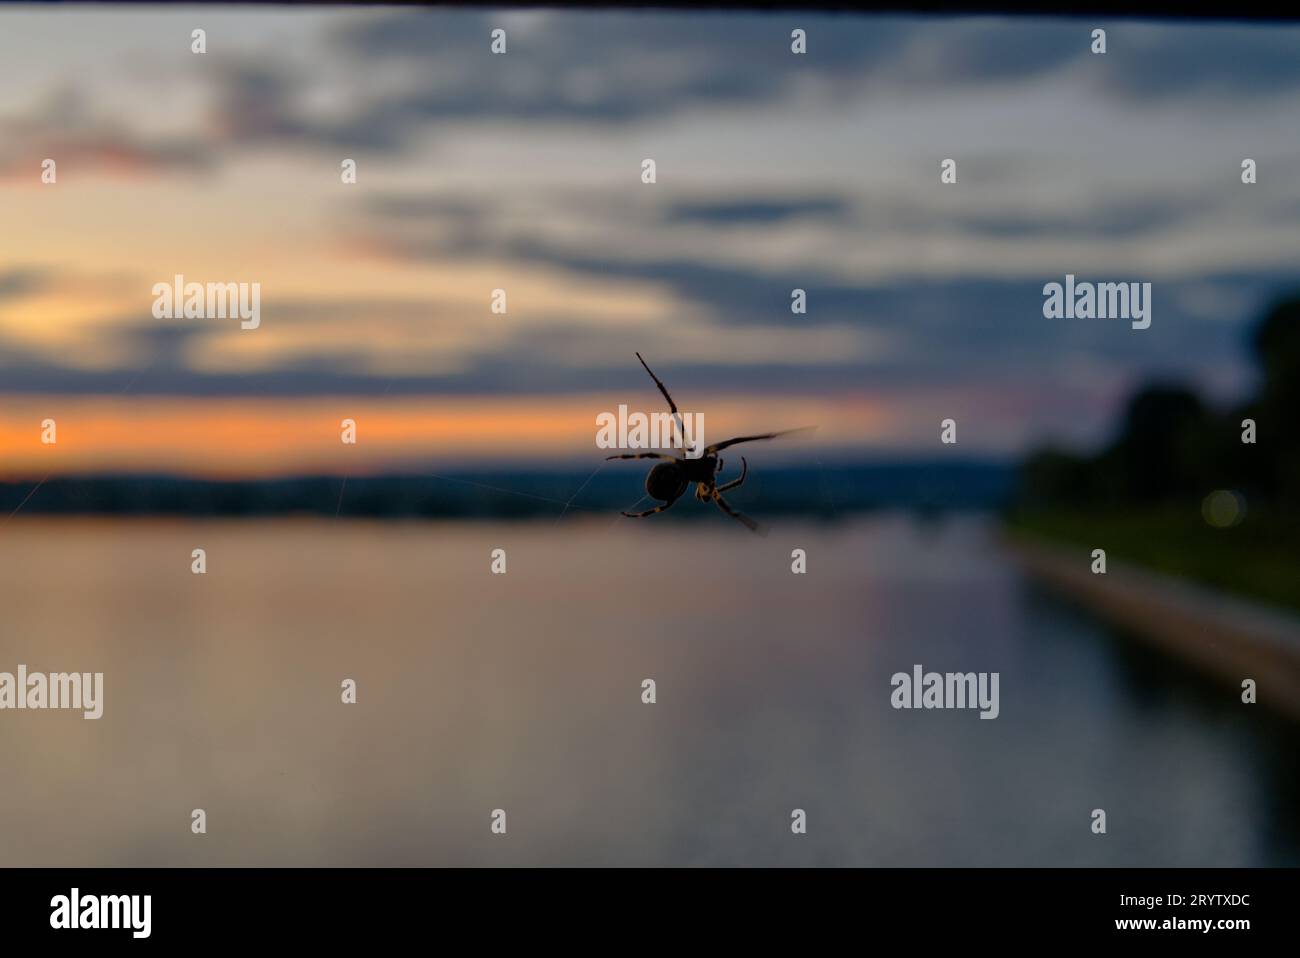 A spider above the Susquehanna River at sunset Stock Photo